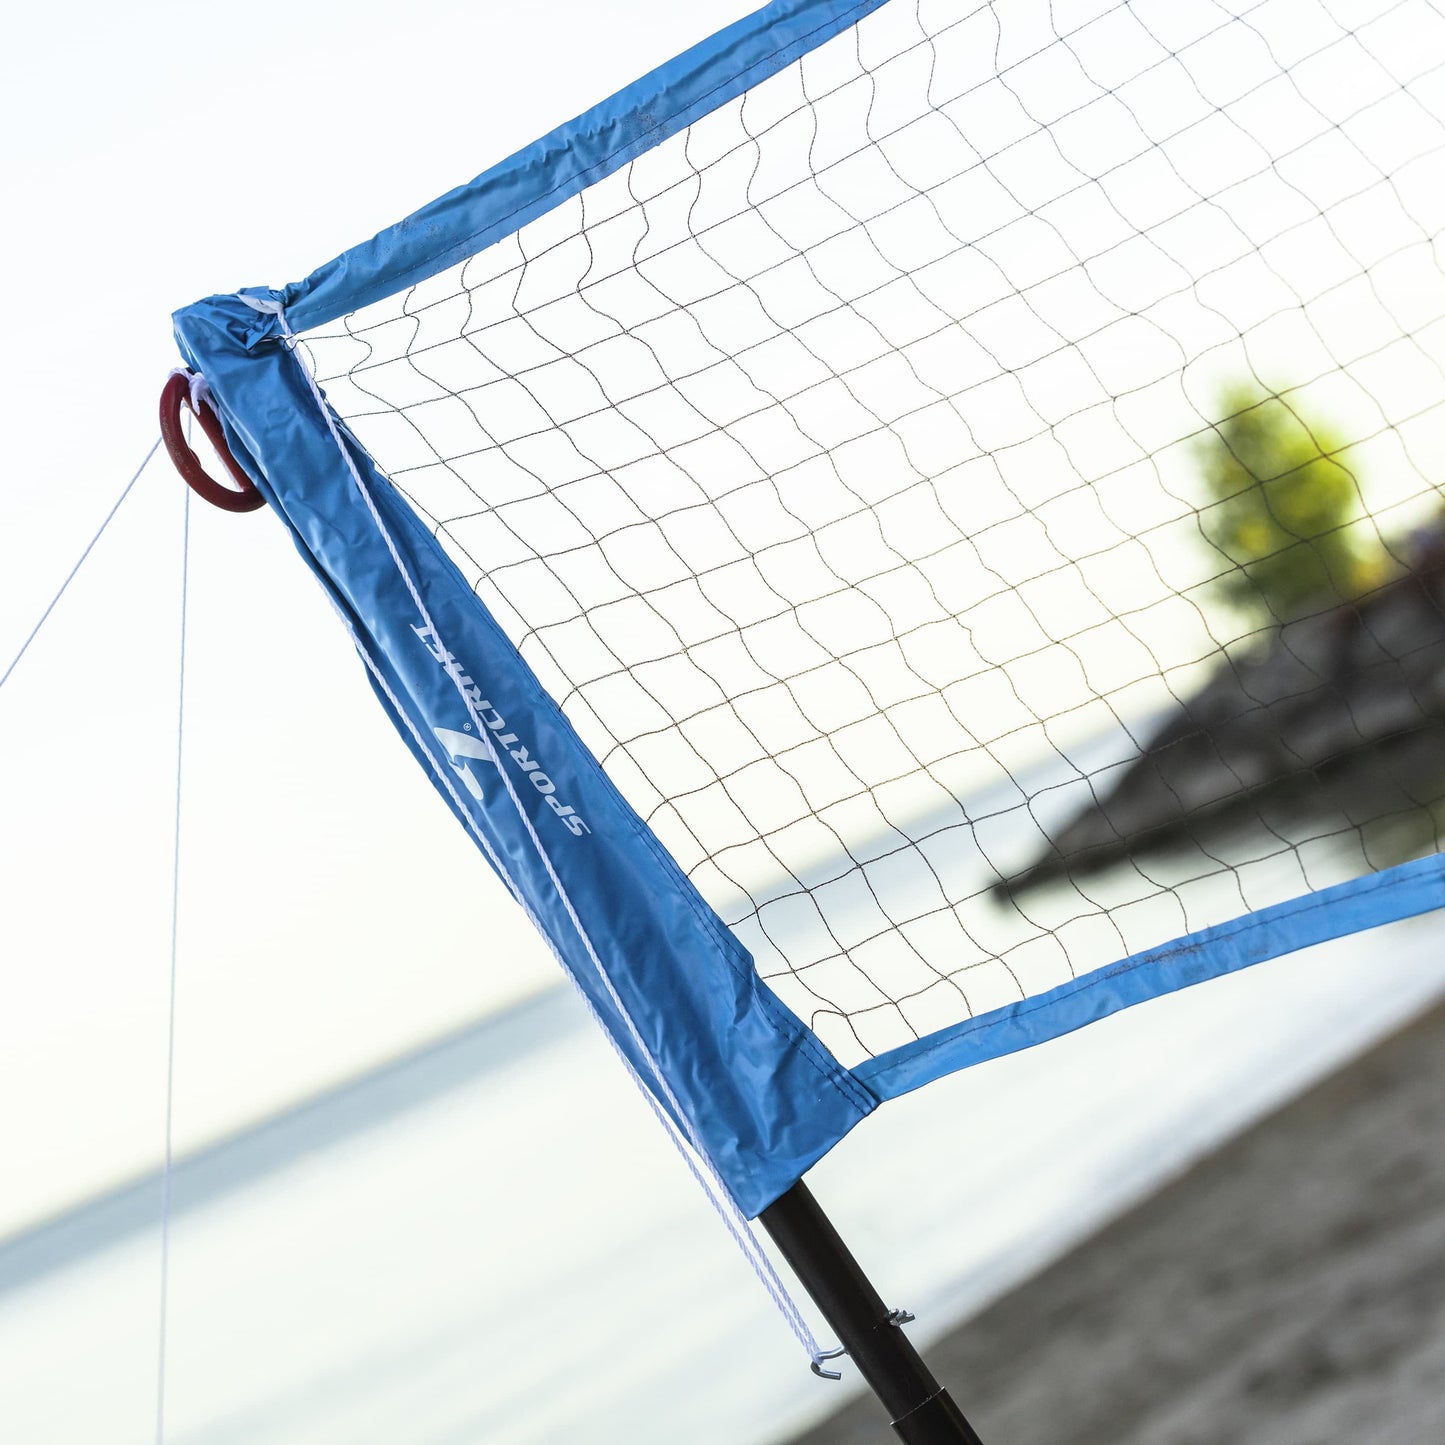 Sportcraft Badminton Volley Ball Set  - Lifestyle Image - Volley Ball net close up on beach